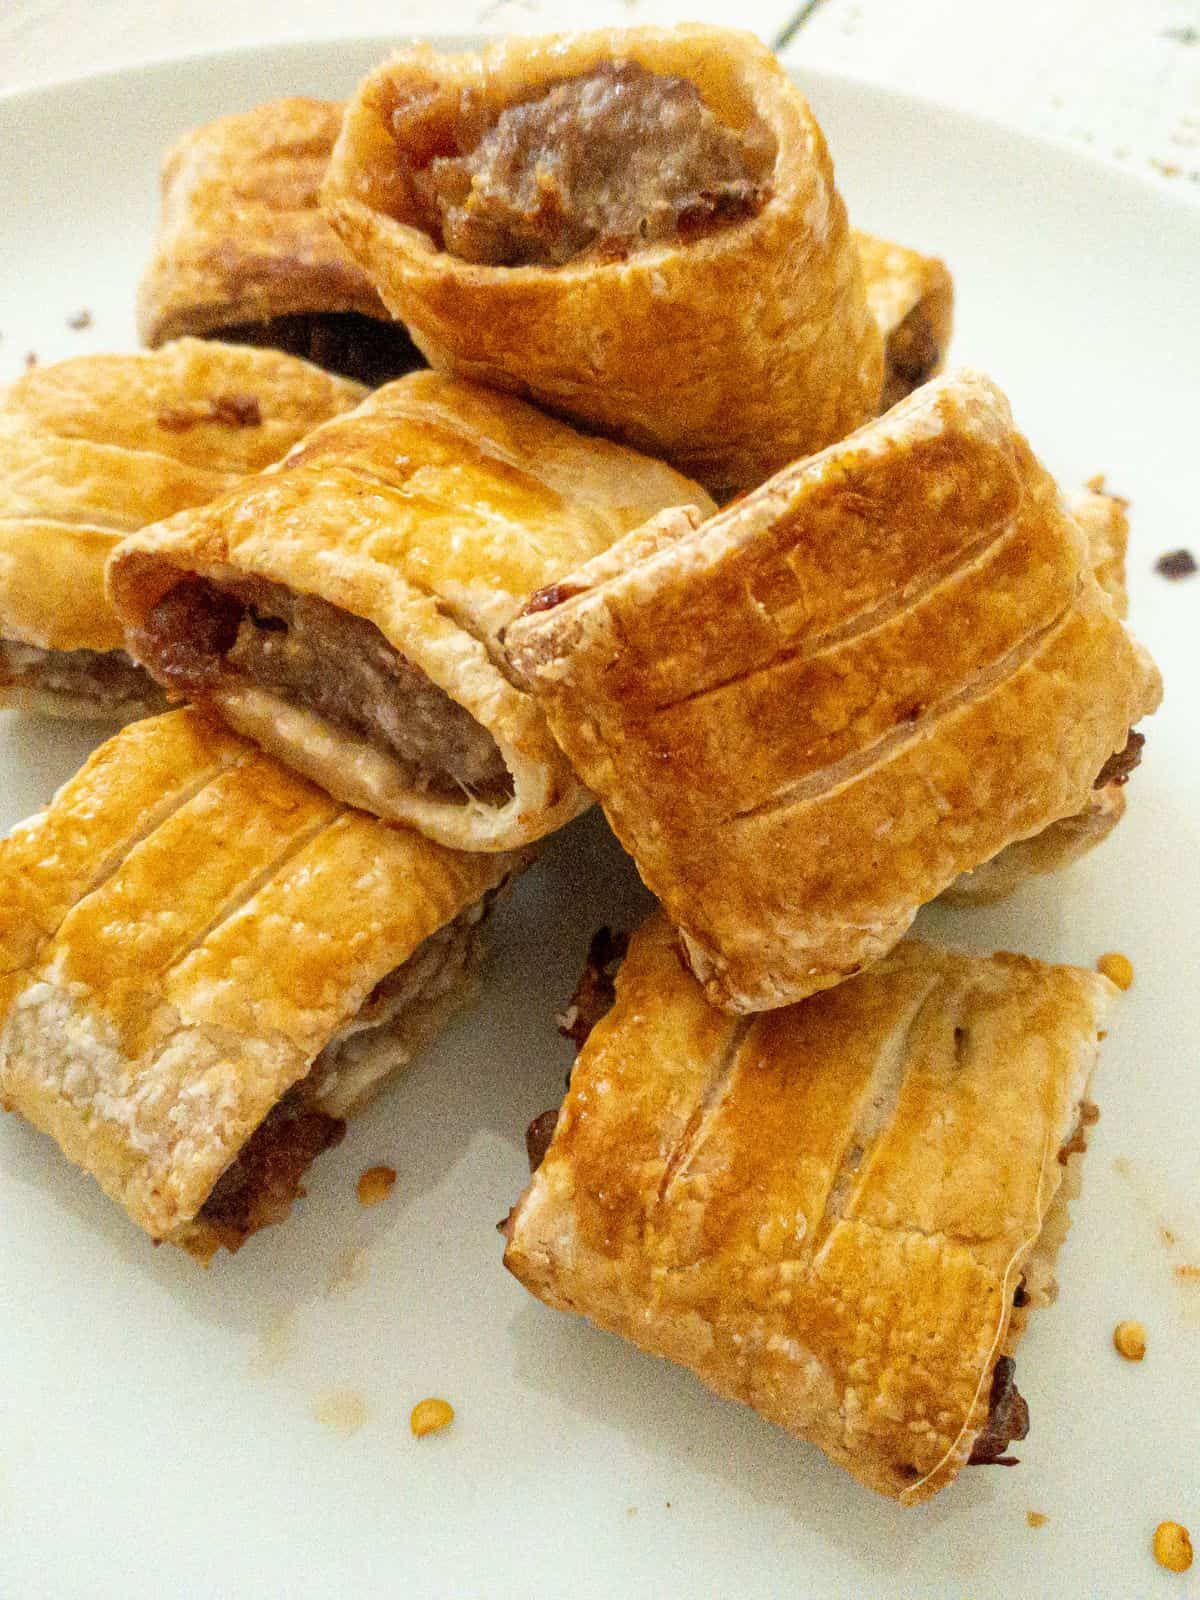 mini gluten free sausage rolls piled on top of each other on a white plate.